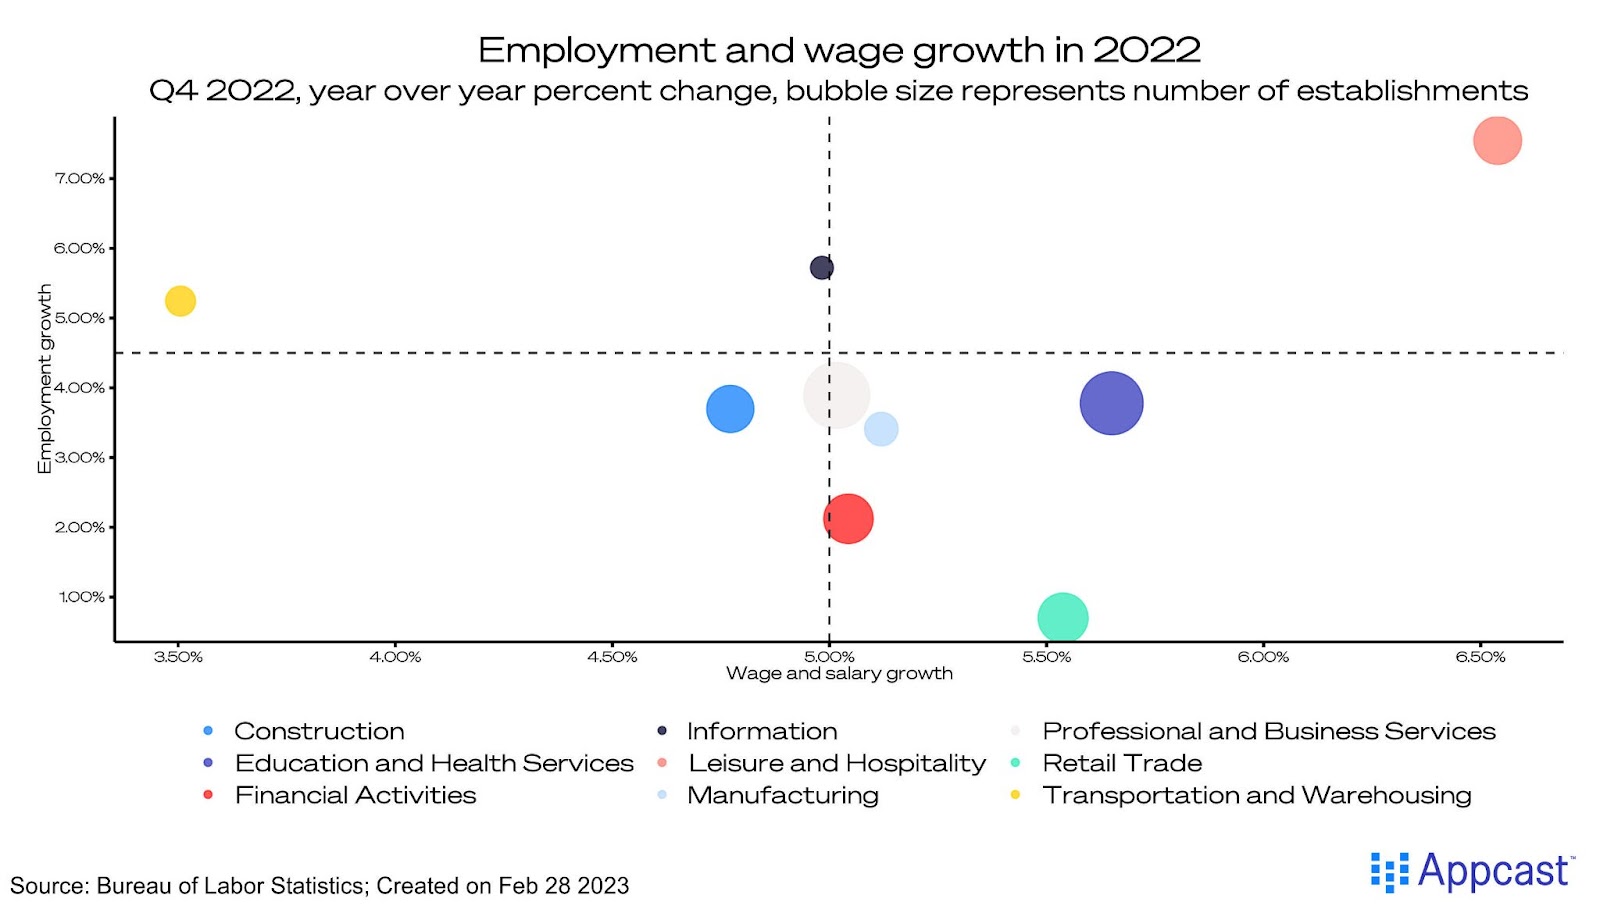 Employment and wage growth in nine key labor market sectors in Q4 of 2022. Transportation and warehousing, leisure and hospitality, and retail require a rebalancing in 2023. Created on February 28, 2023 for Appcast. 